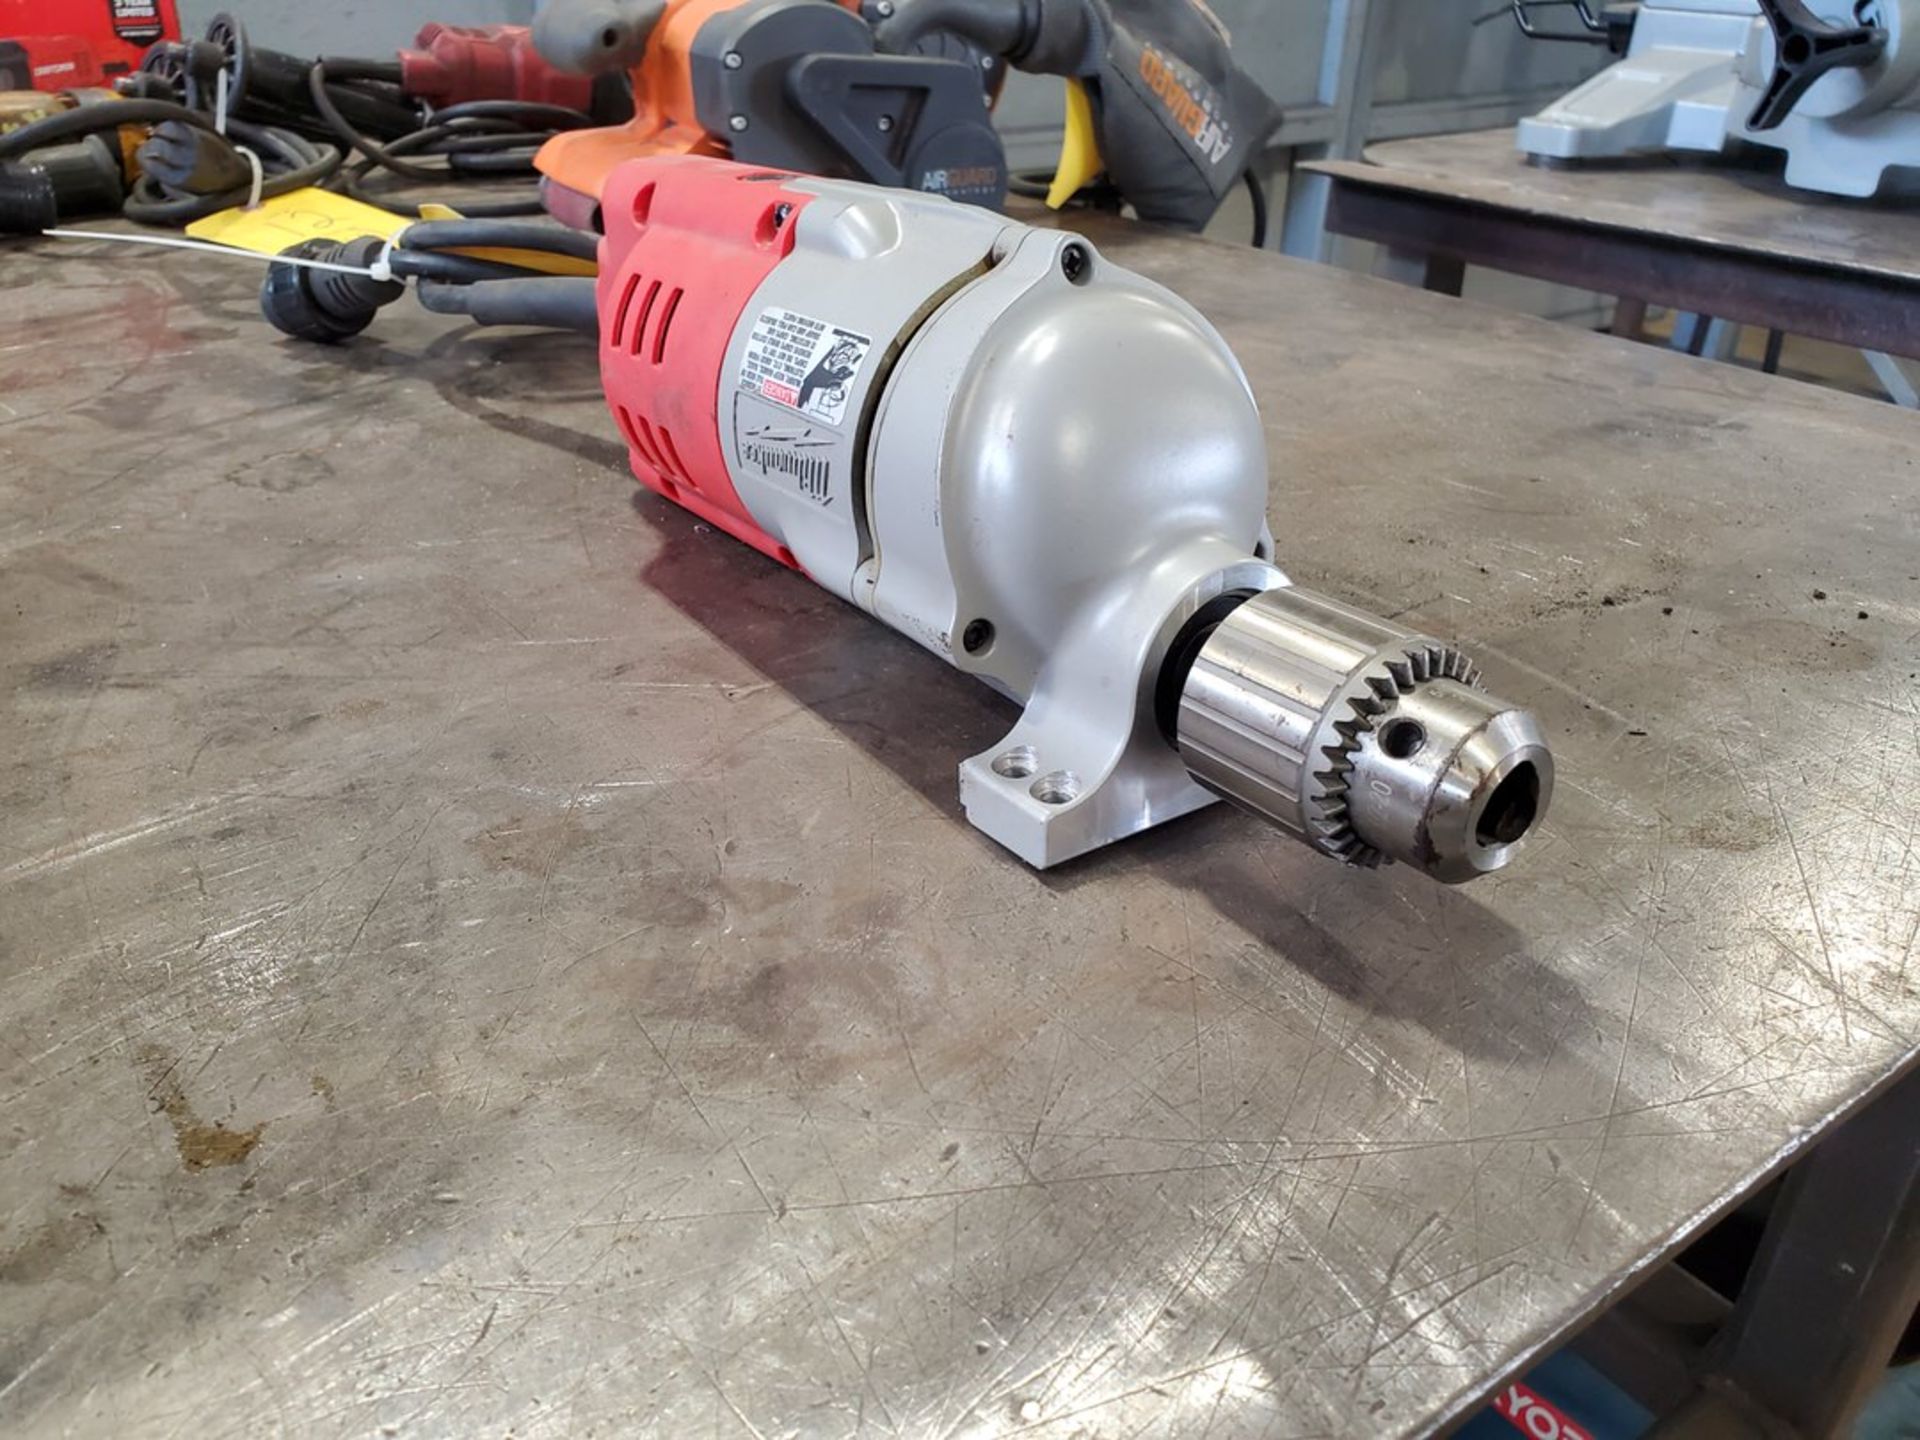 Miwaukee 1/2" Drill 120V, 60HZ, 6.2A - Image 4 of 6